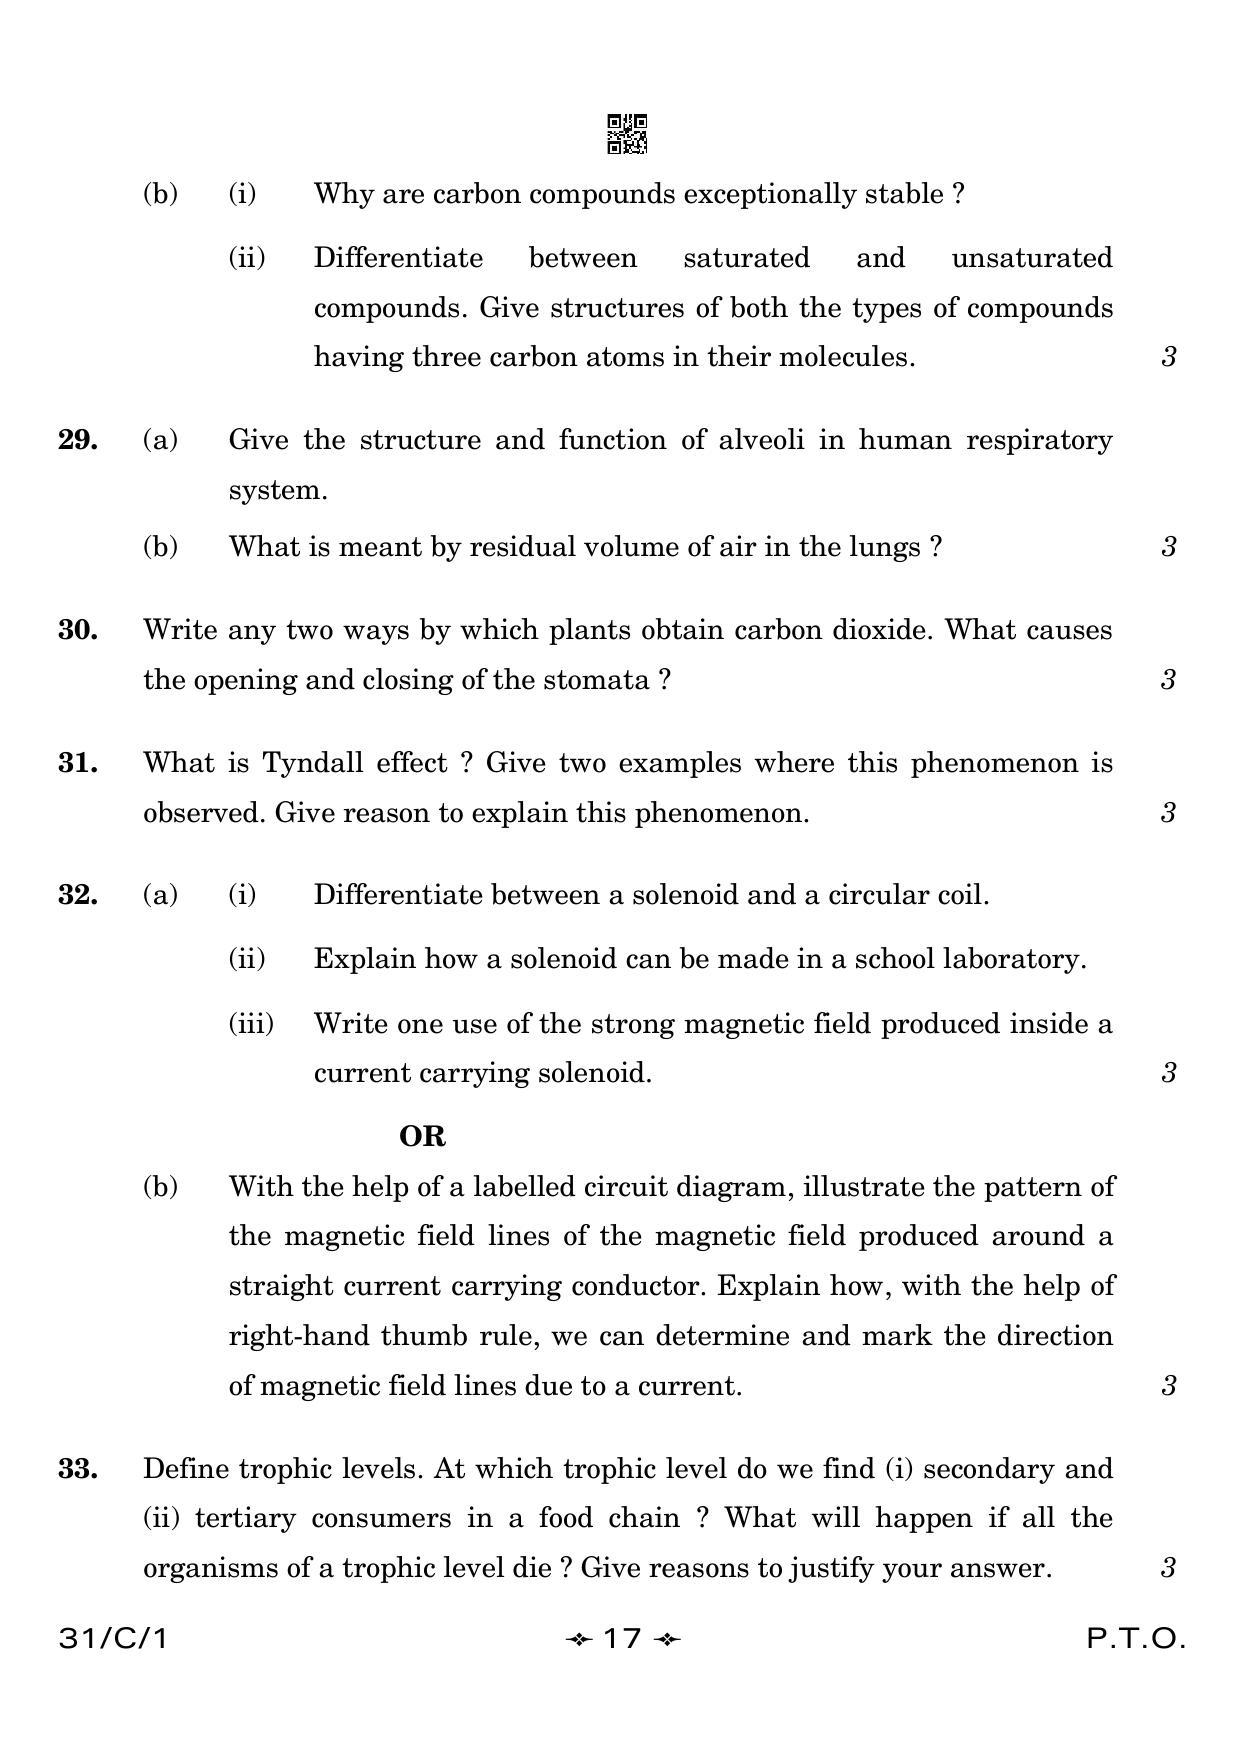 CBSE Class 10 31-1 Science 2023 (Compartment) Question Paper - Page 17